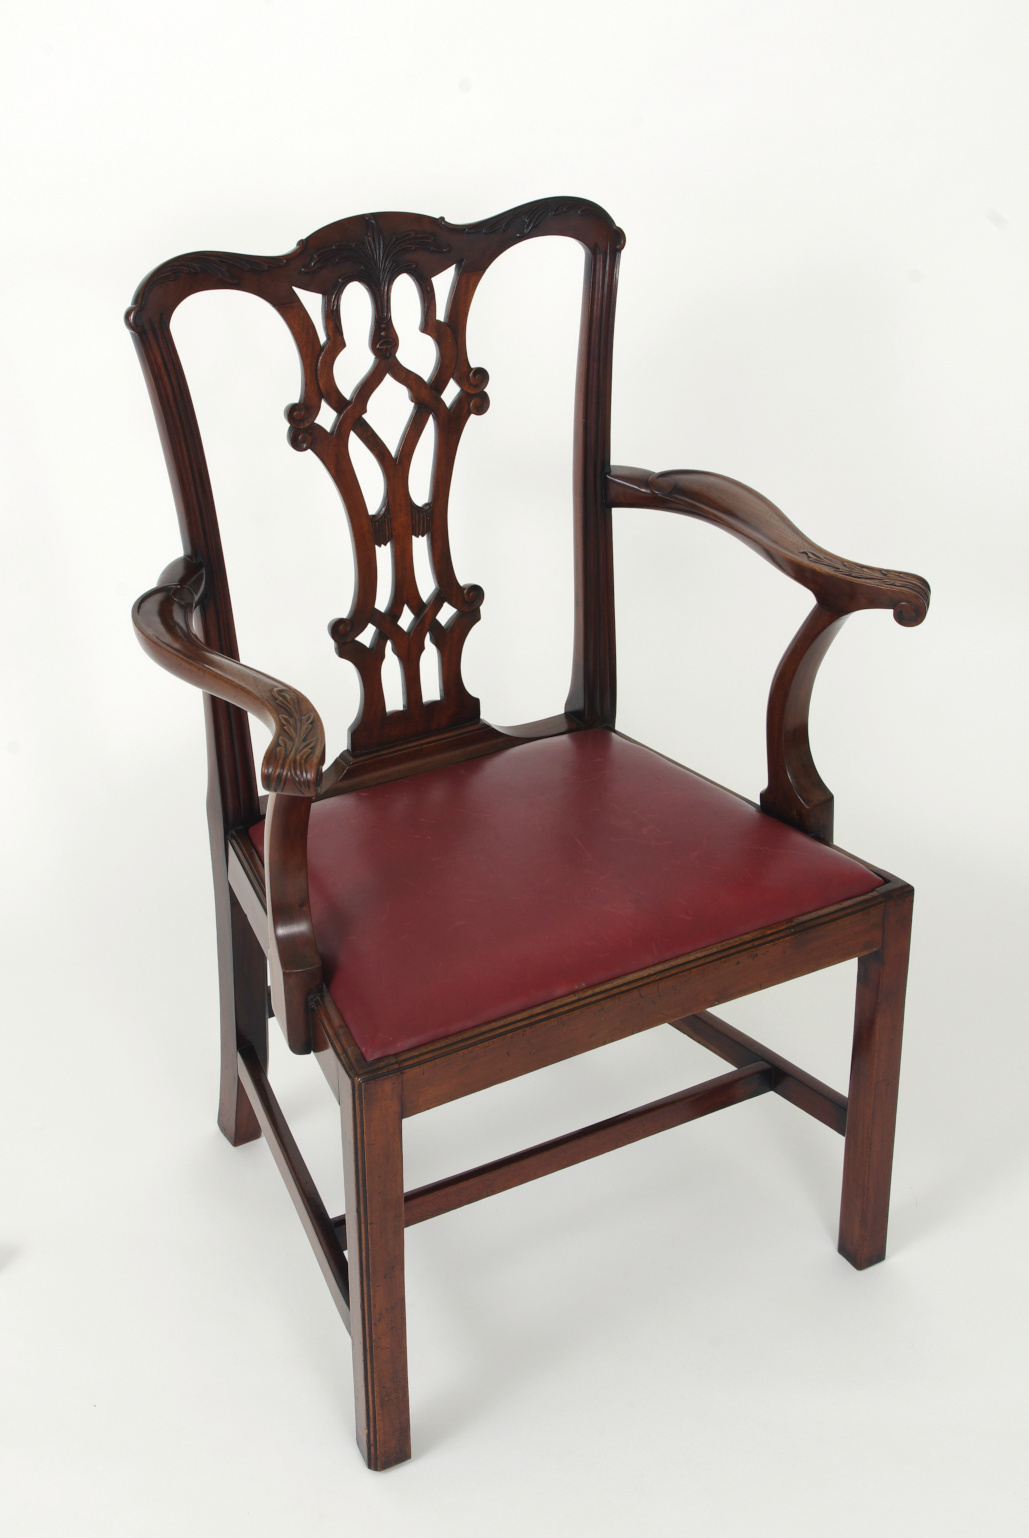 Set of Eight Chippendale Mahogany Dining Chairs (6+2), early 19th c.